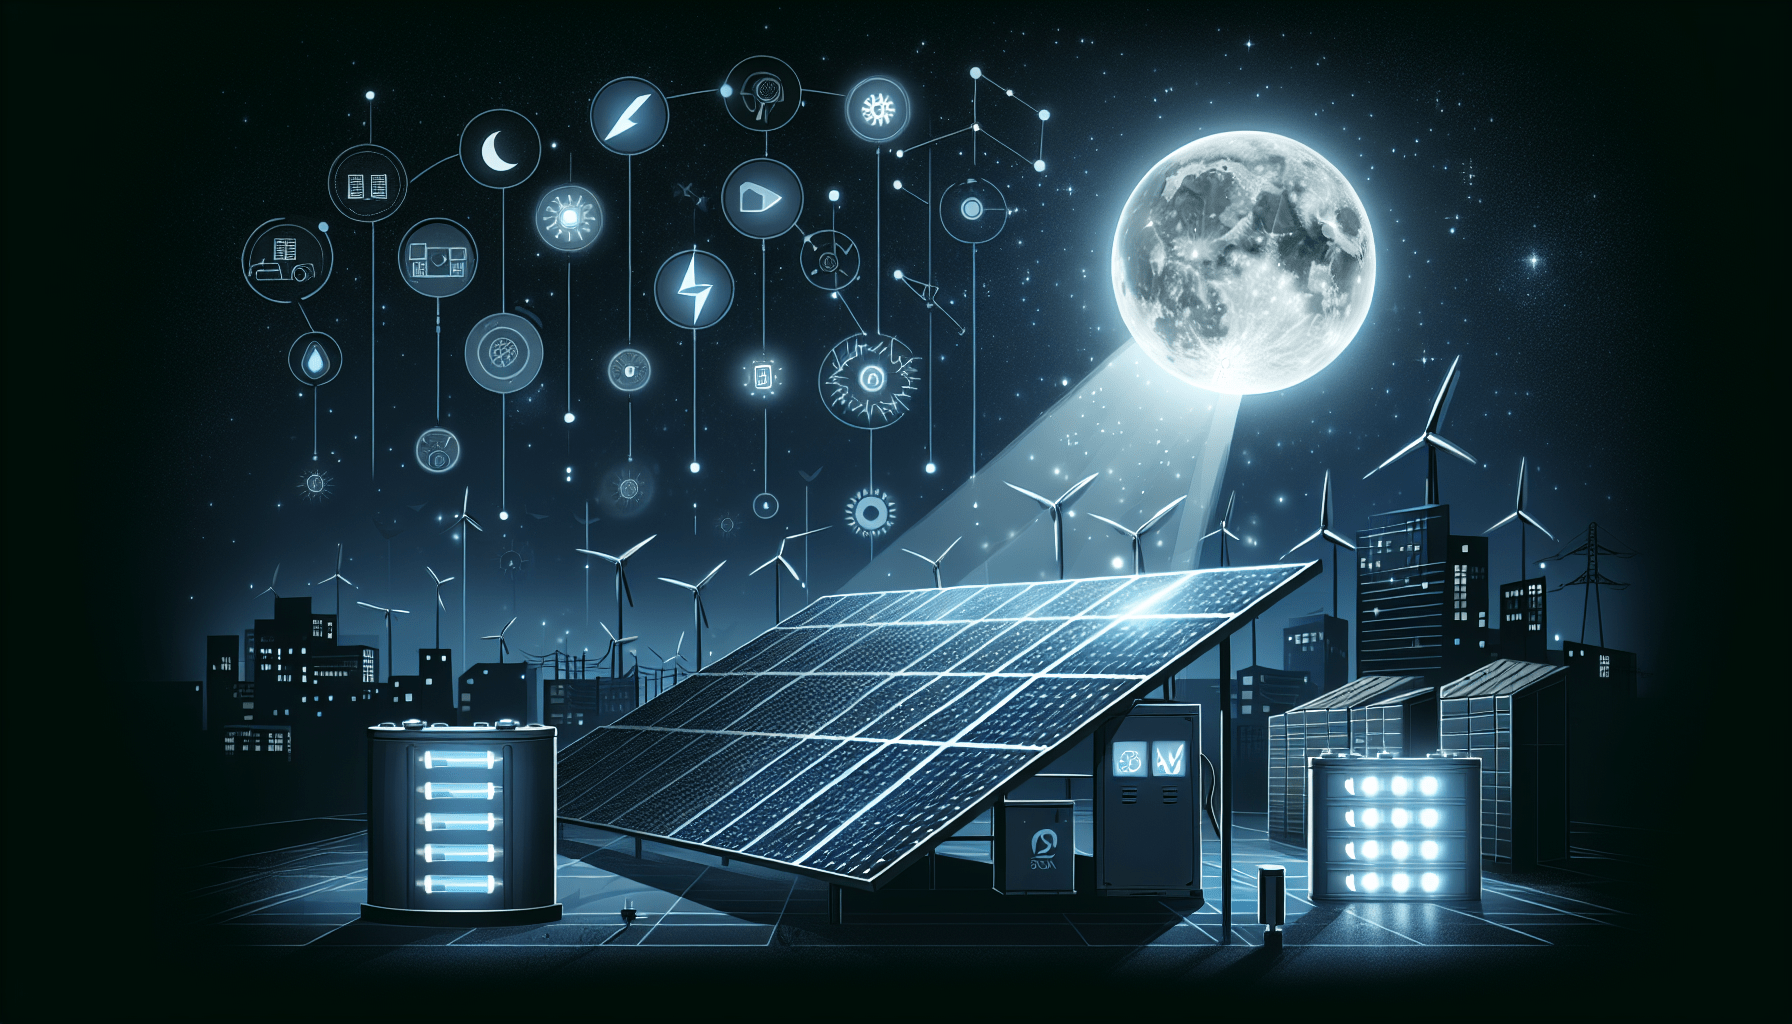 How Do Solar Panels Work At Night?